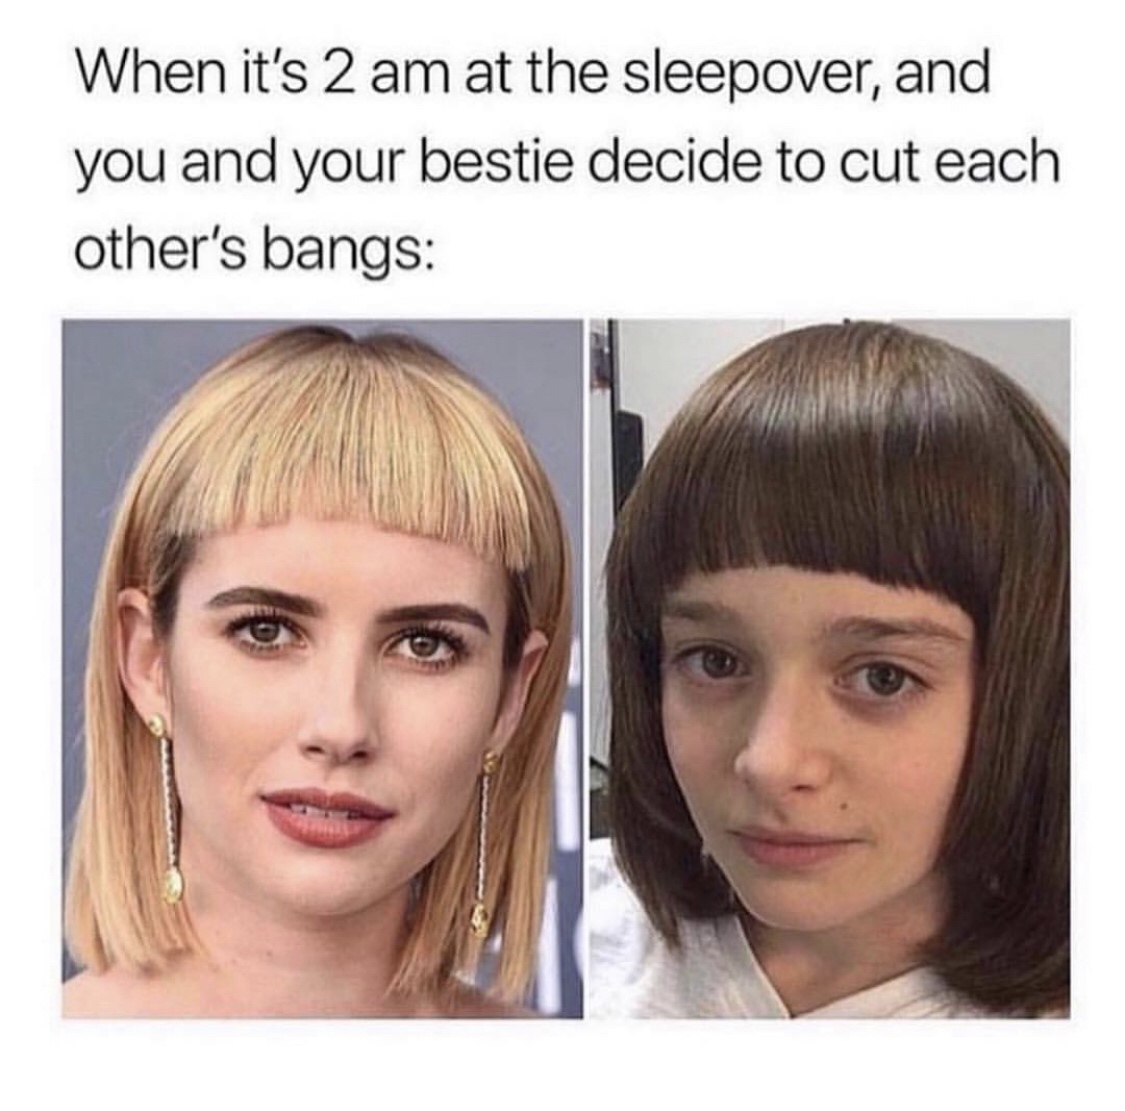 meme about bangs meme - When it's 2 am at the sleepover, and you and your bestie decide to cut each other's bangs